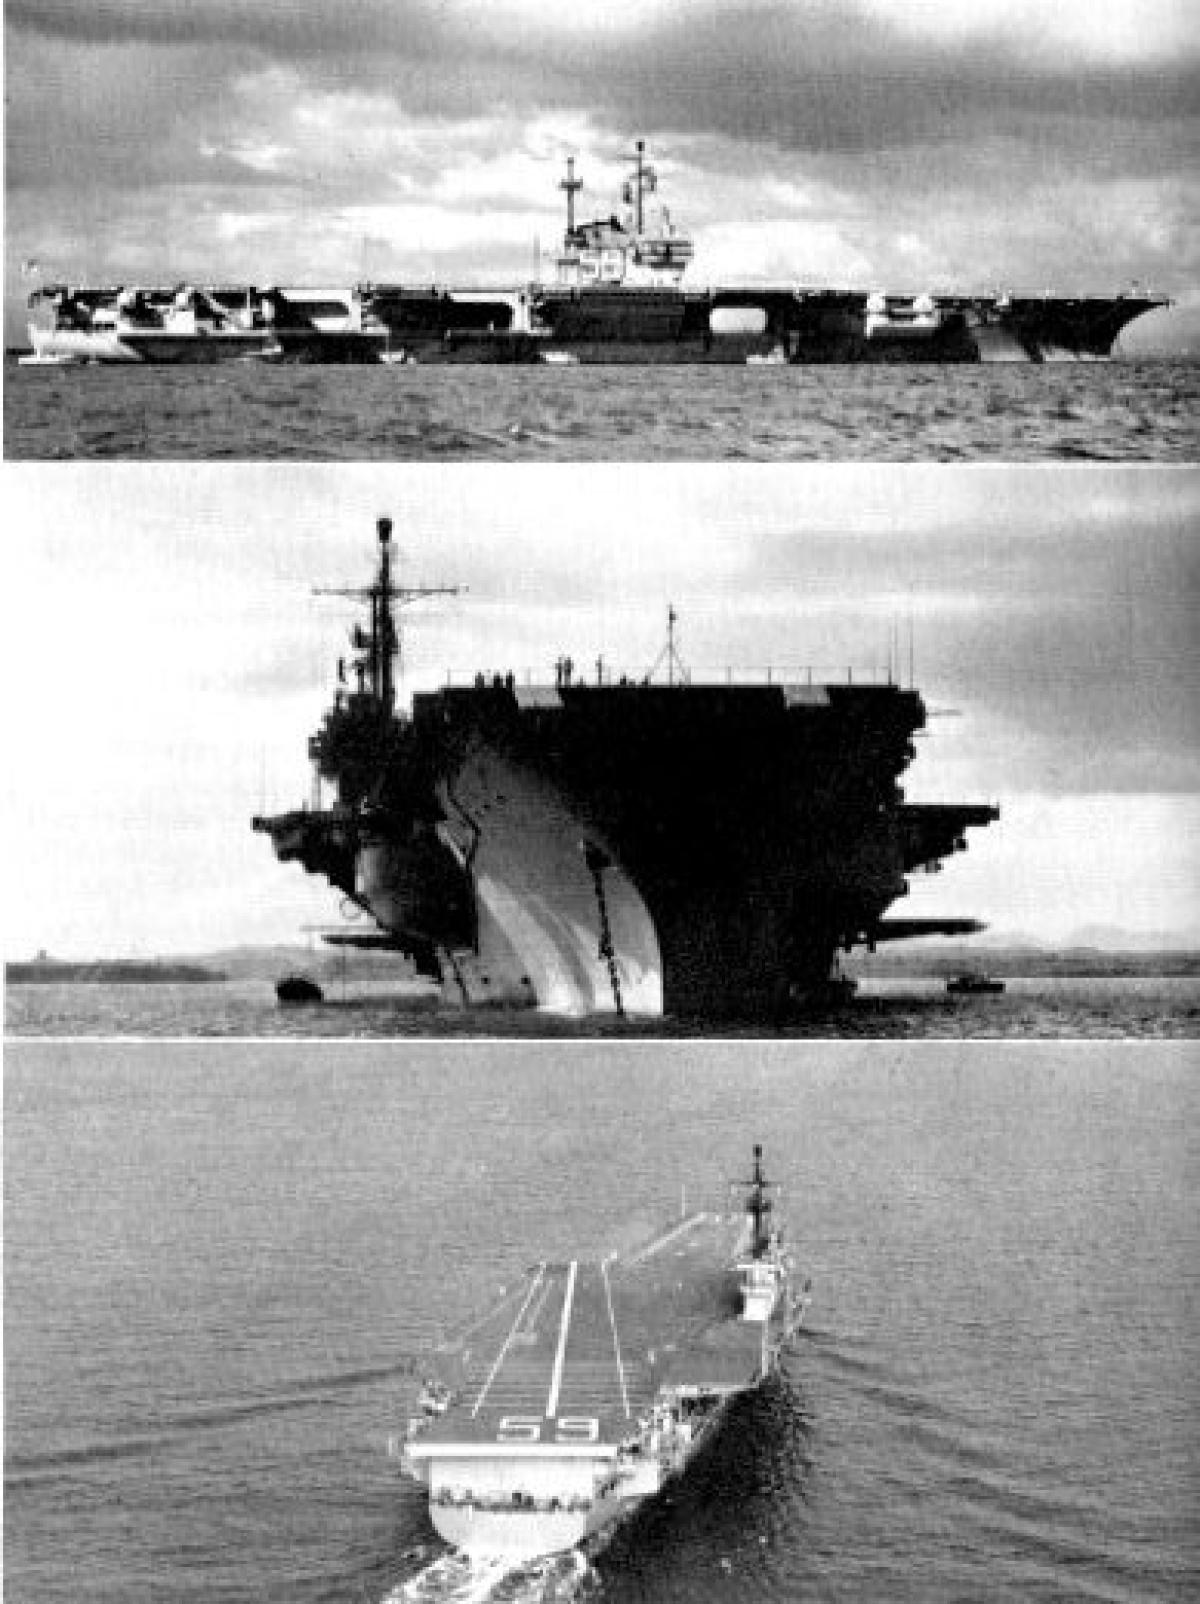 The first jet age carrier of the U.S. Navy - USS "Forrestal"